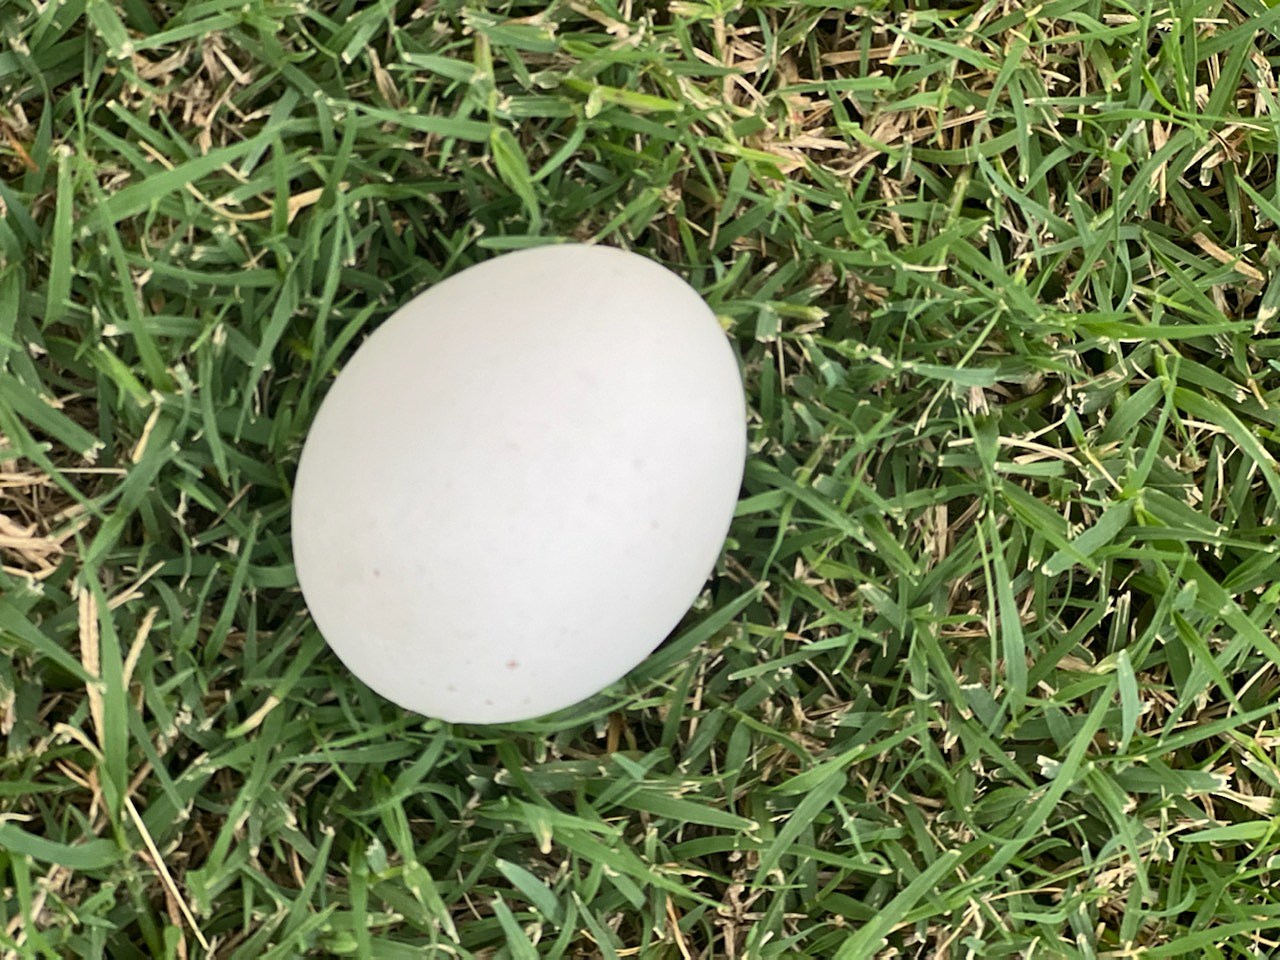 Is It Bad Luck to Find an Egg In Your Yard? pic